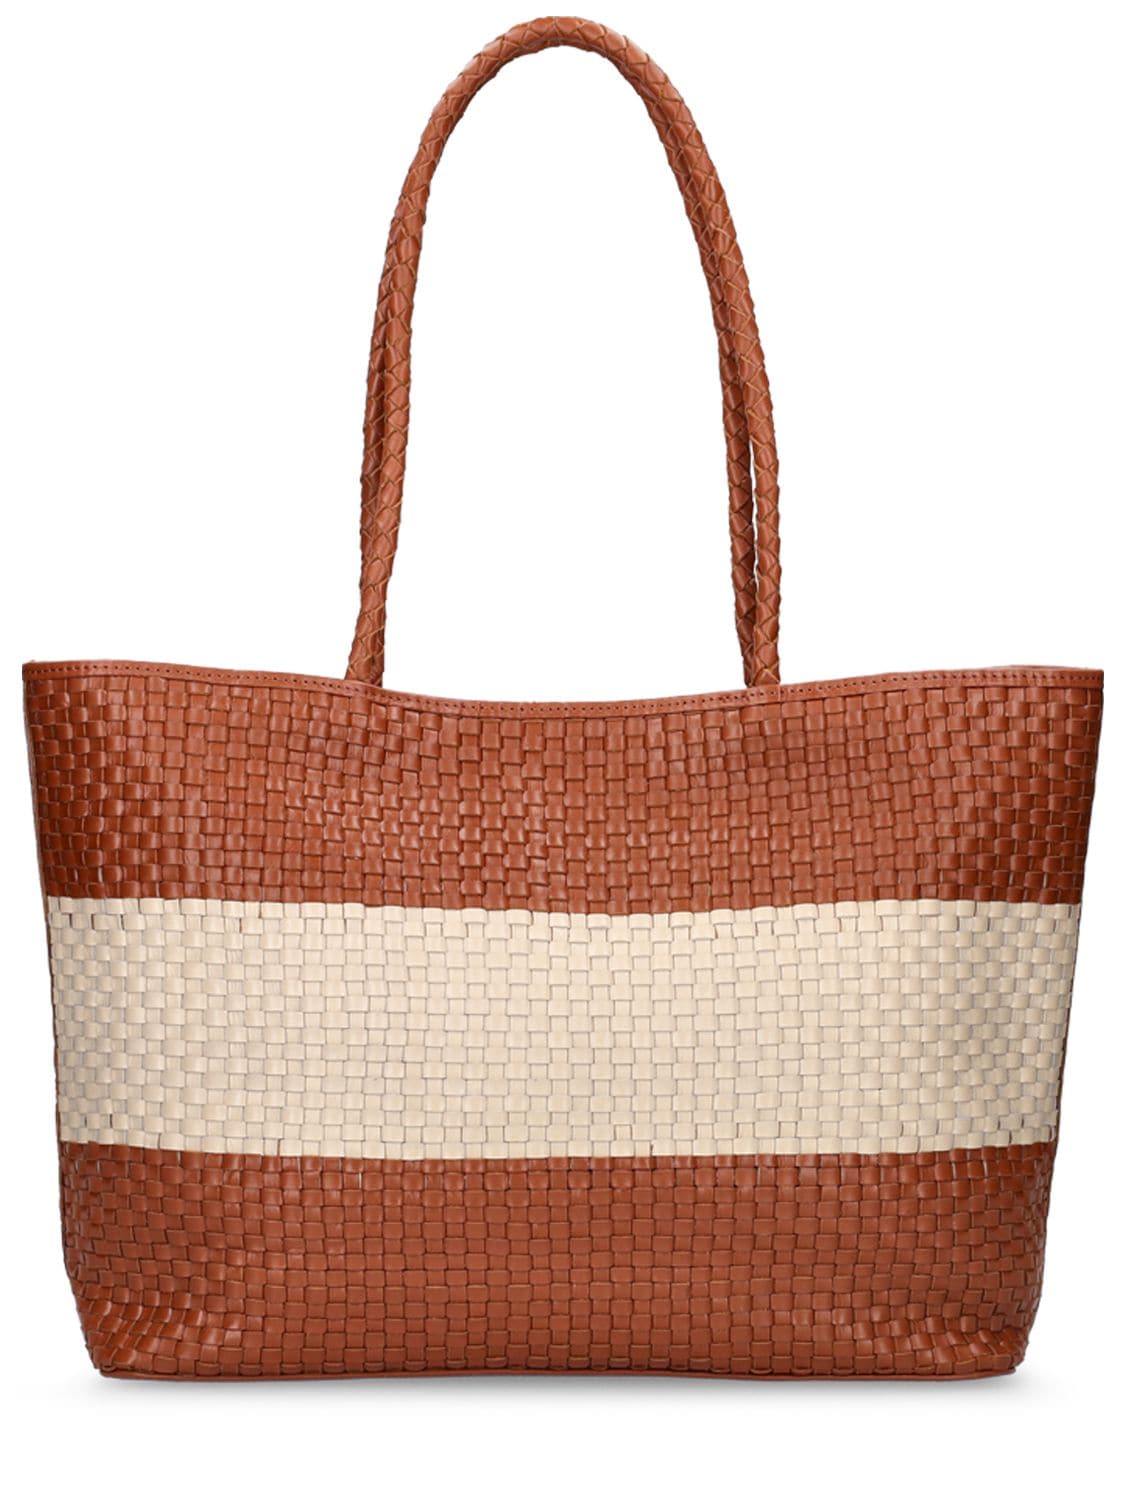 BEMBIEN Lucie Leather Tote Bag